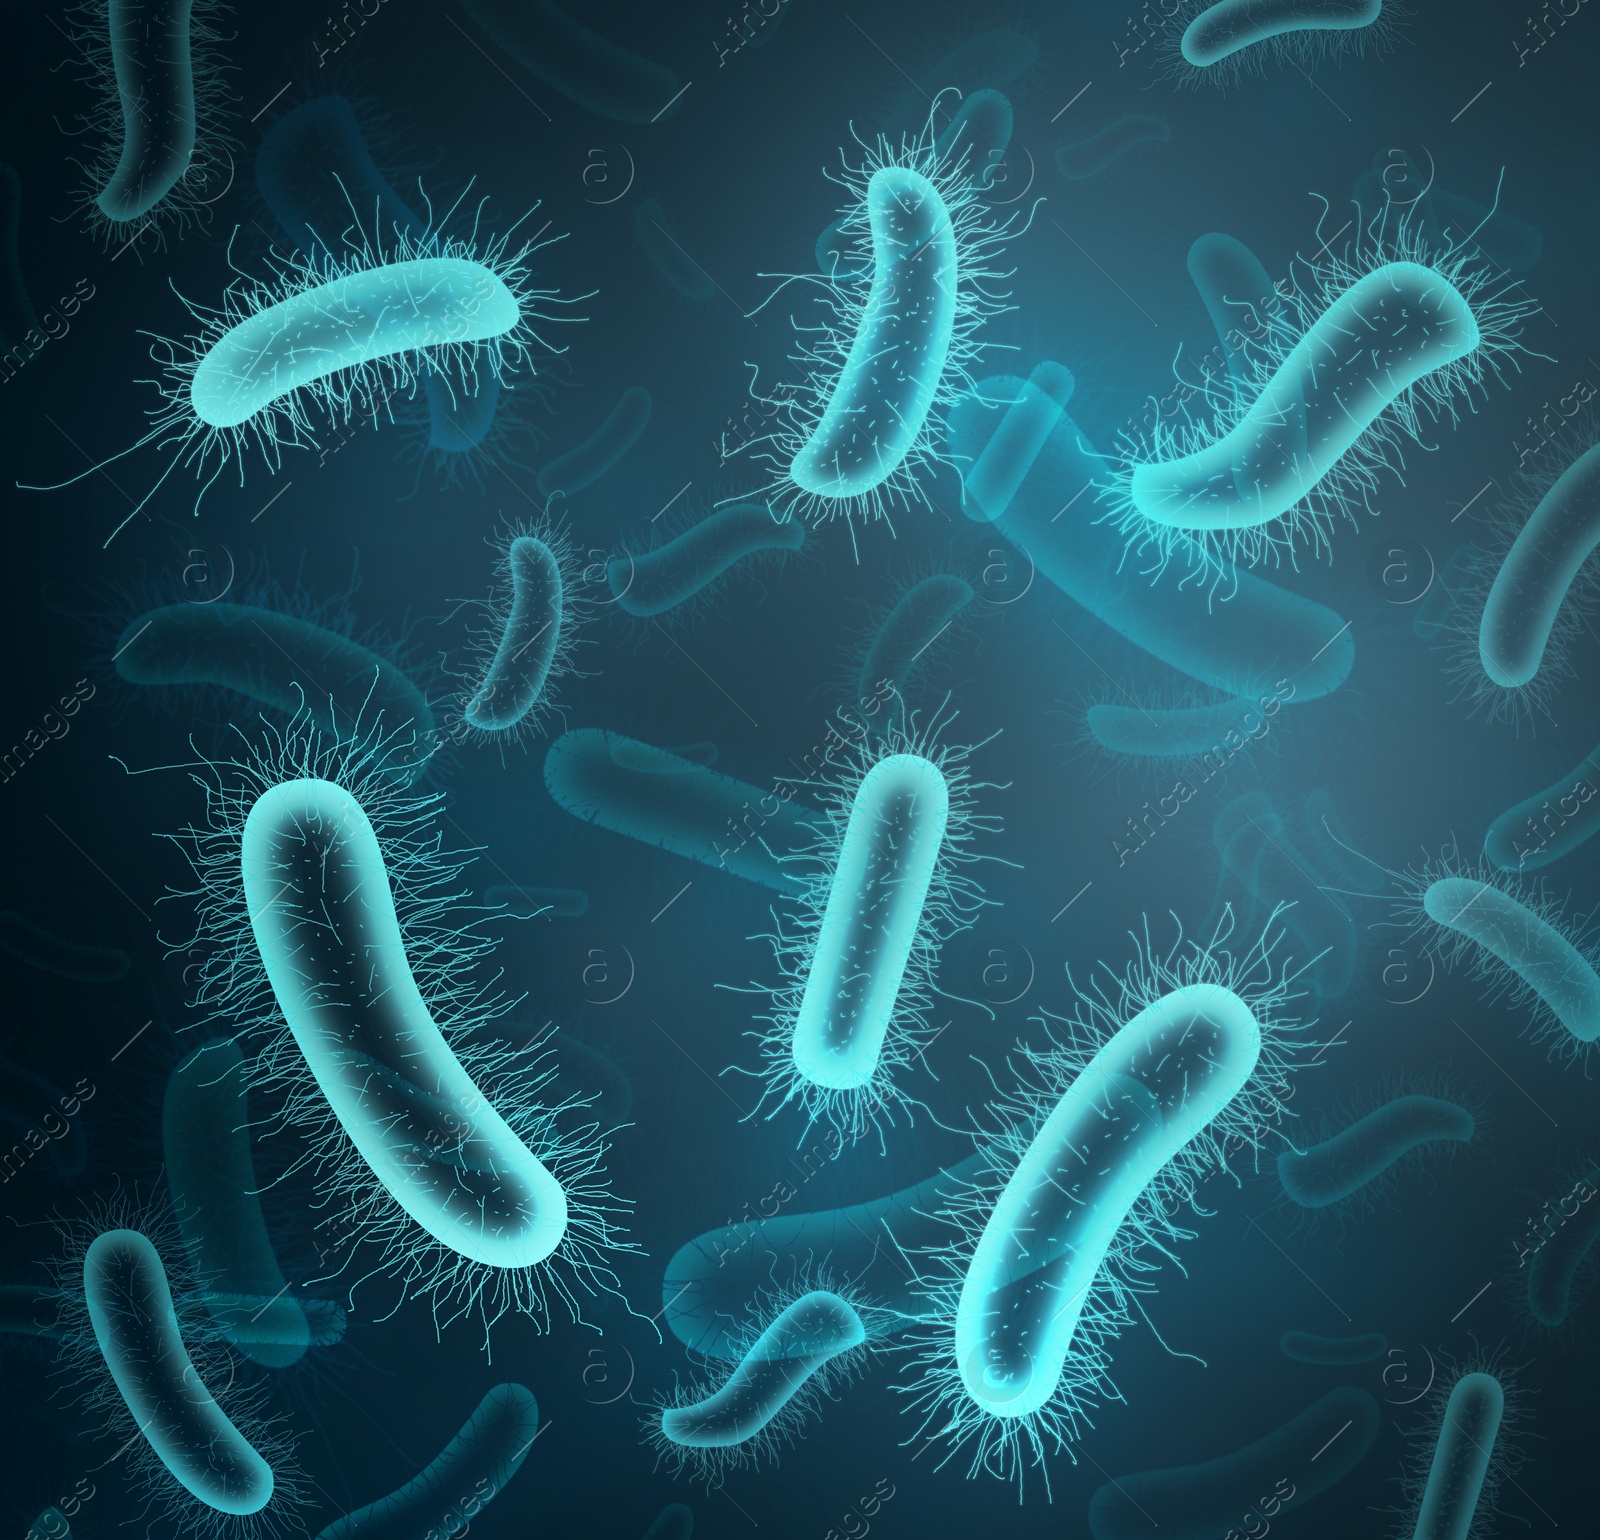 Illustration of Closeup view of bacteria under microscope. Illustration